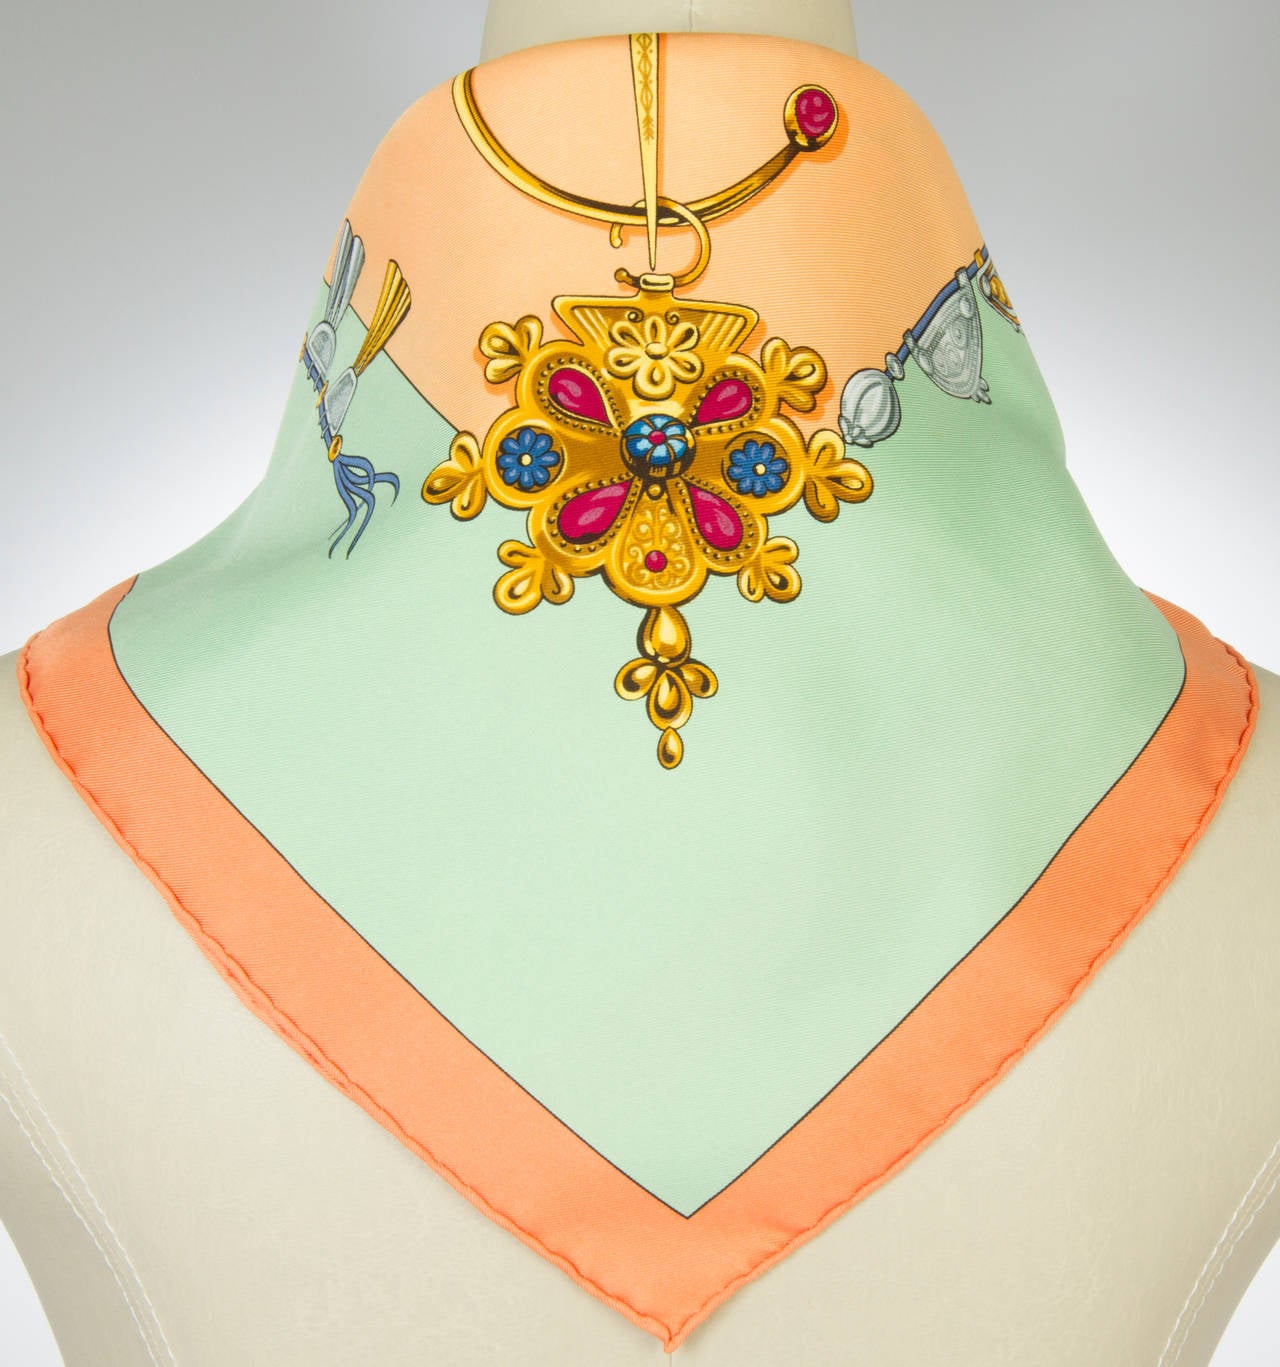 This is a stunning silk scarf  aptly named Parures des Sables  or Jewels of the Sands.